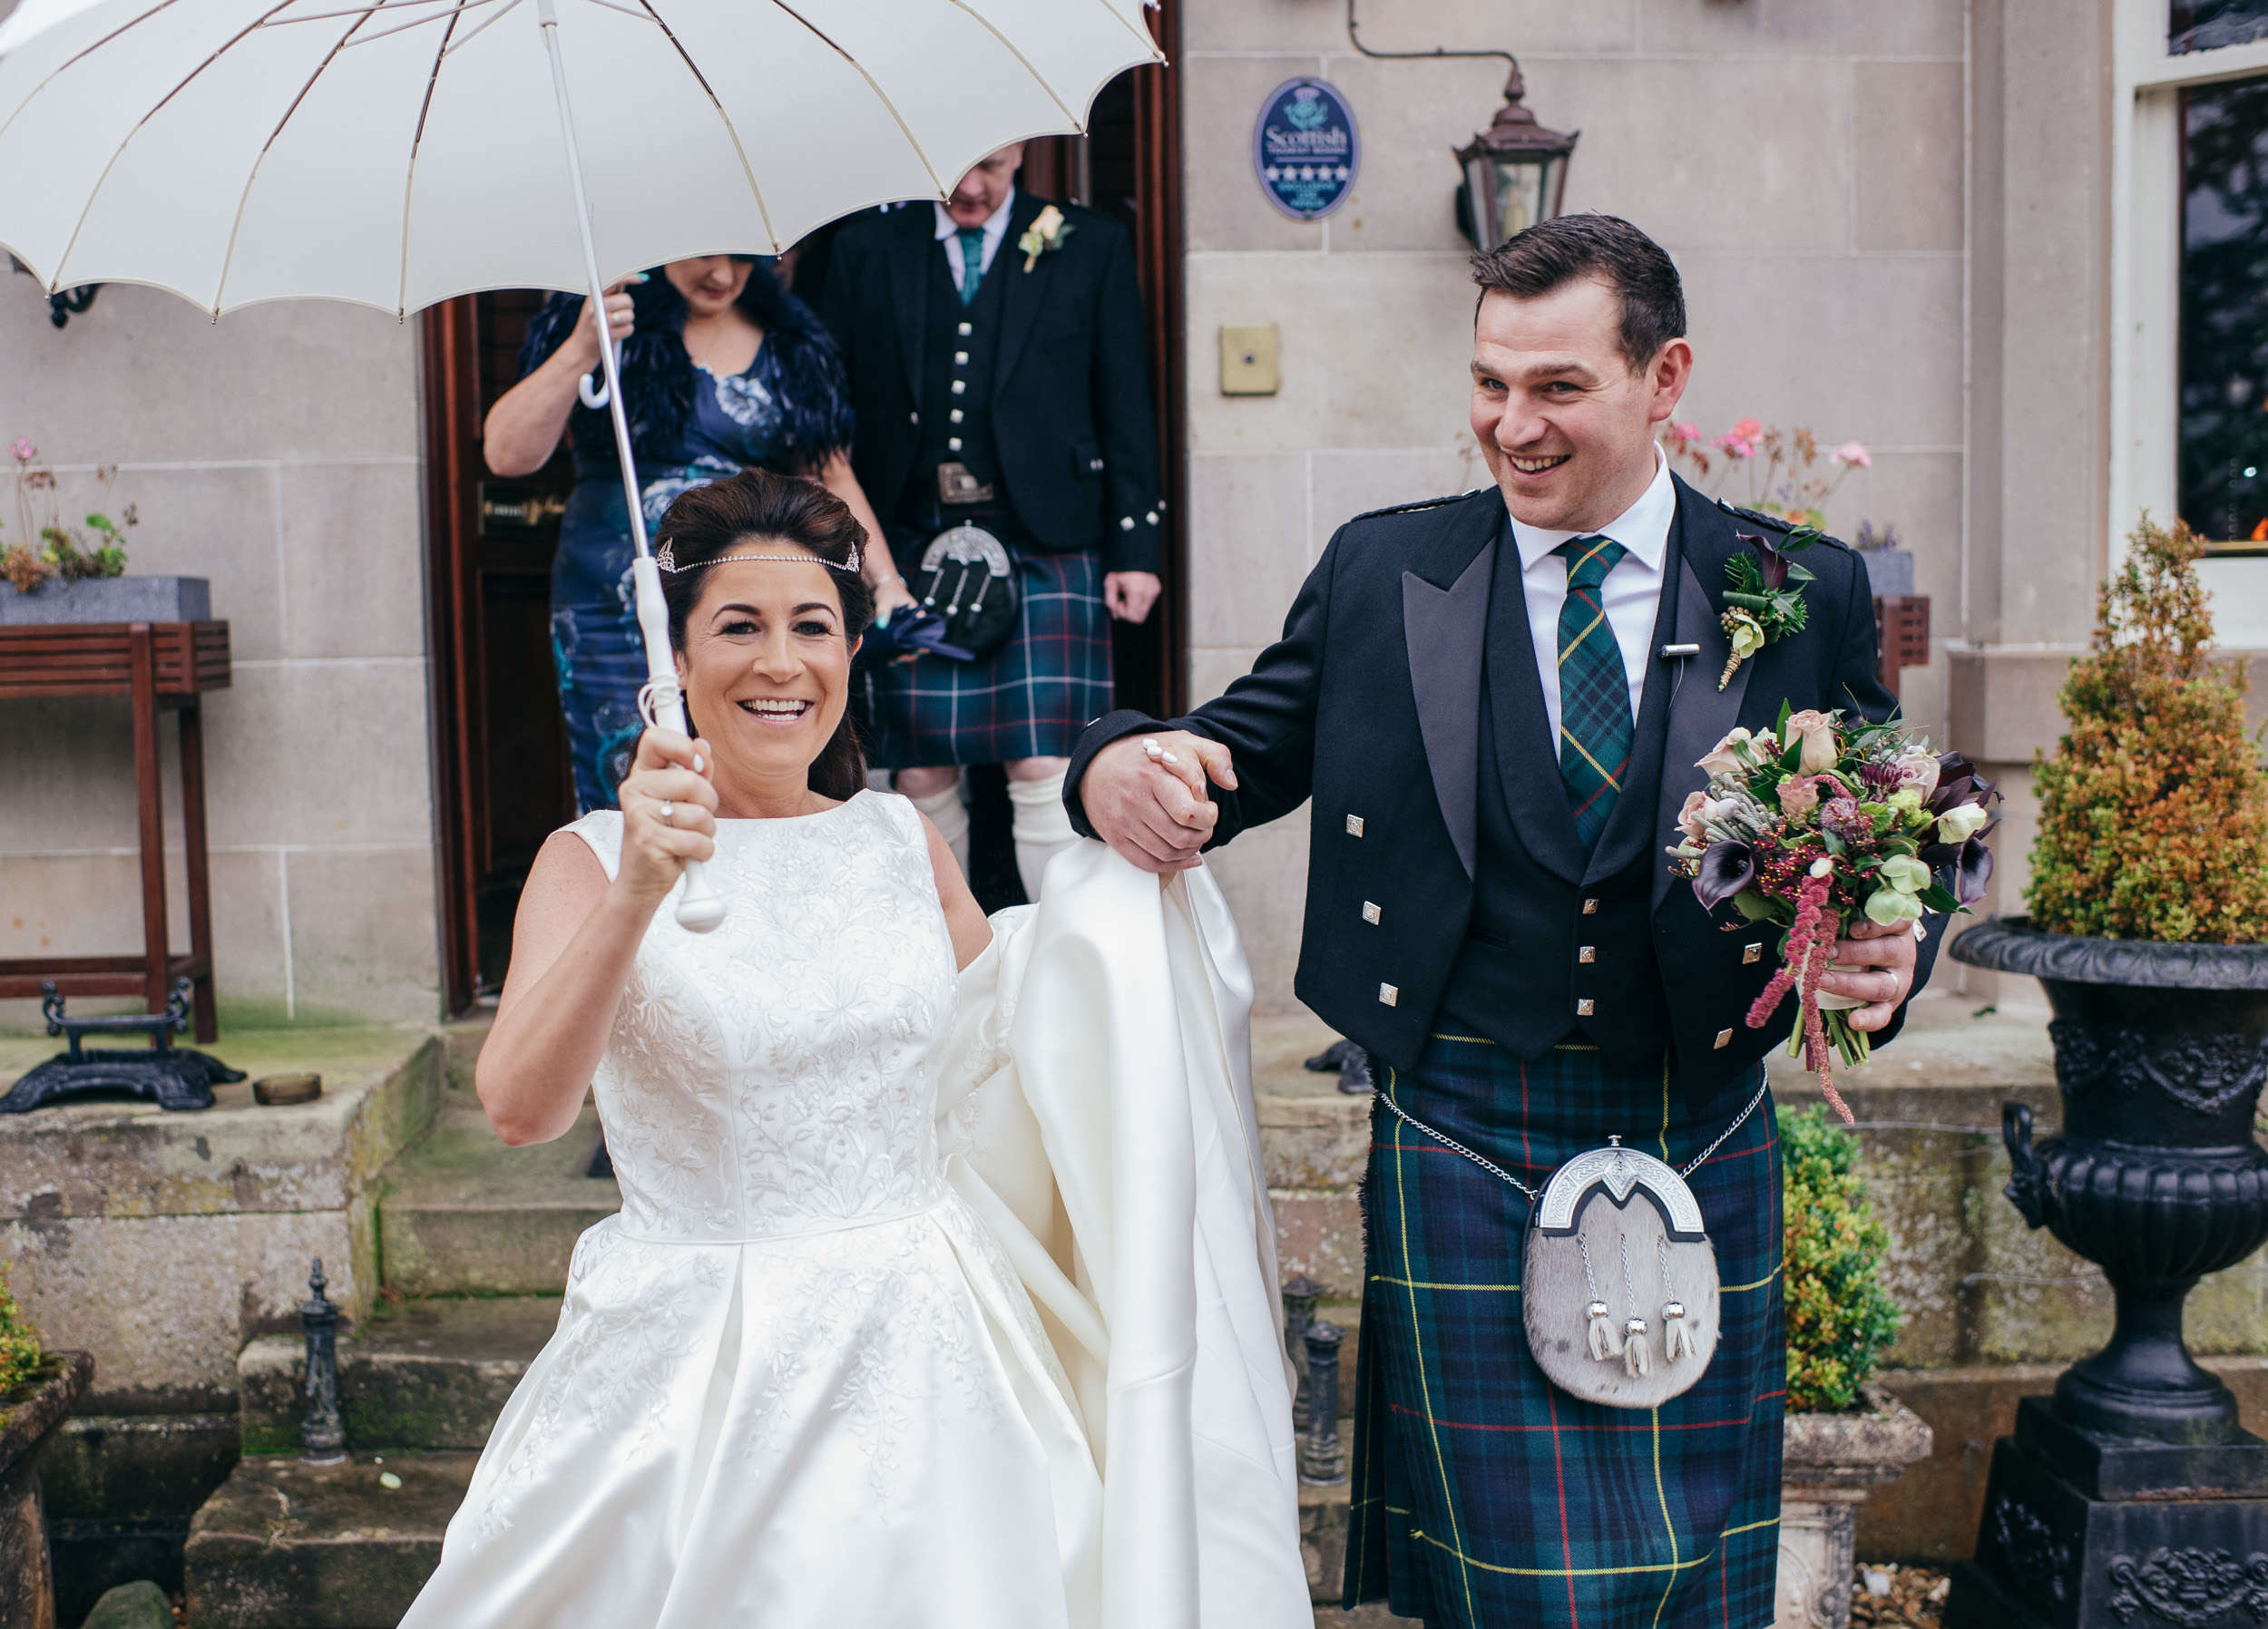 Bride and groom in the rain